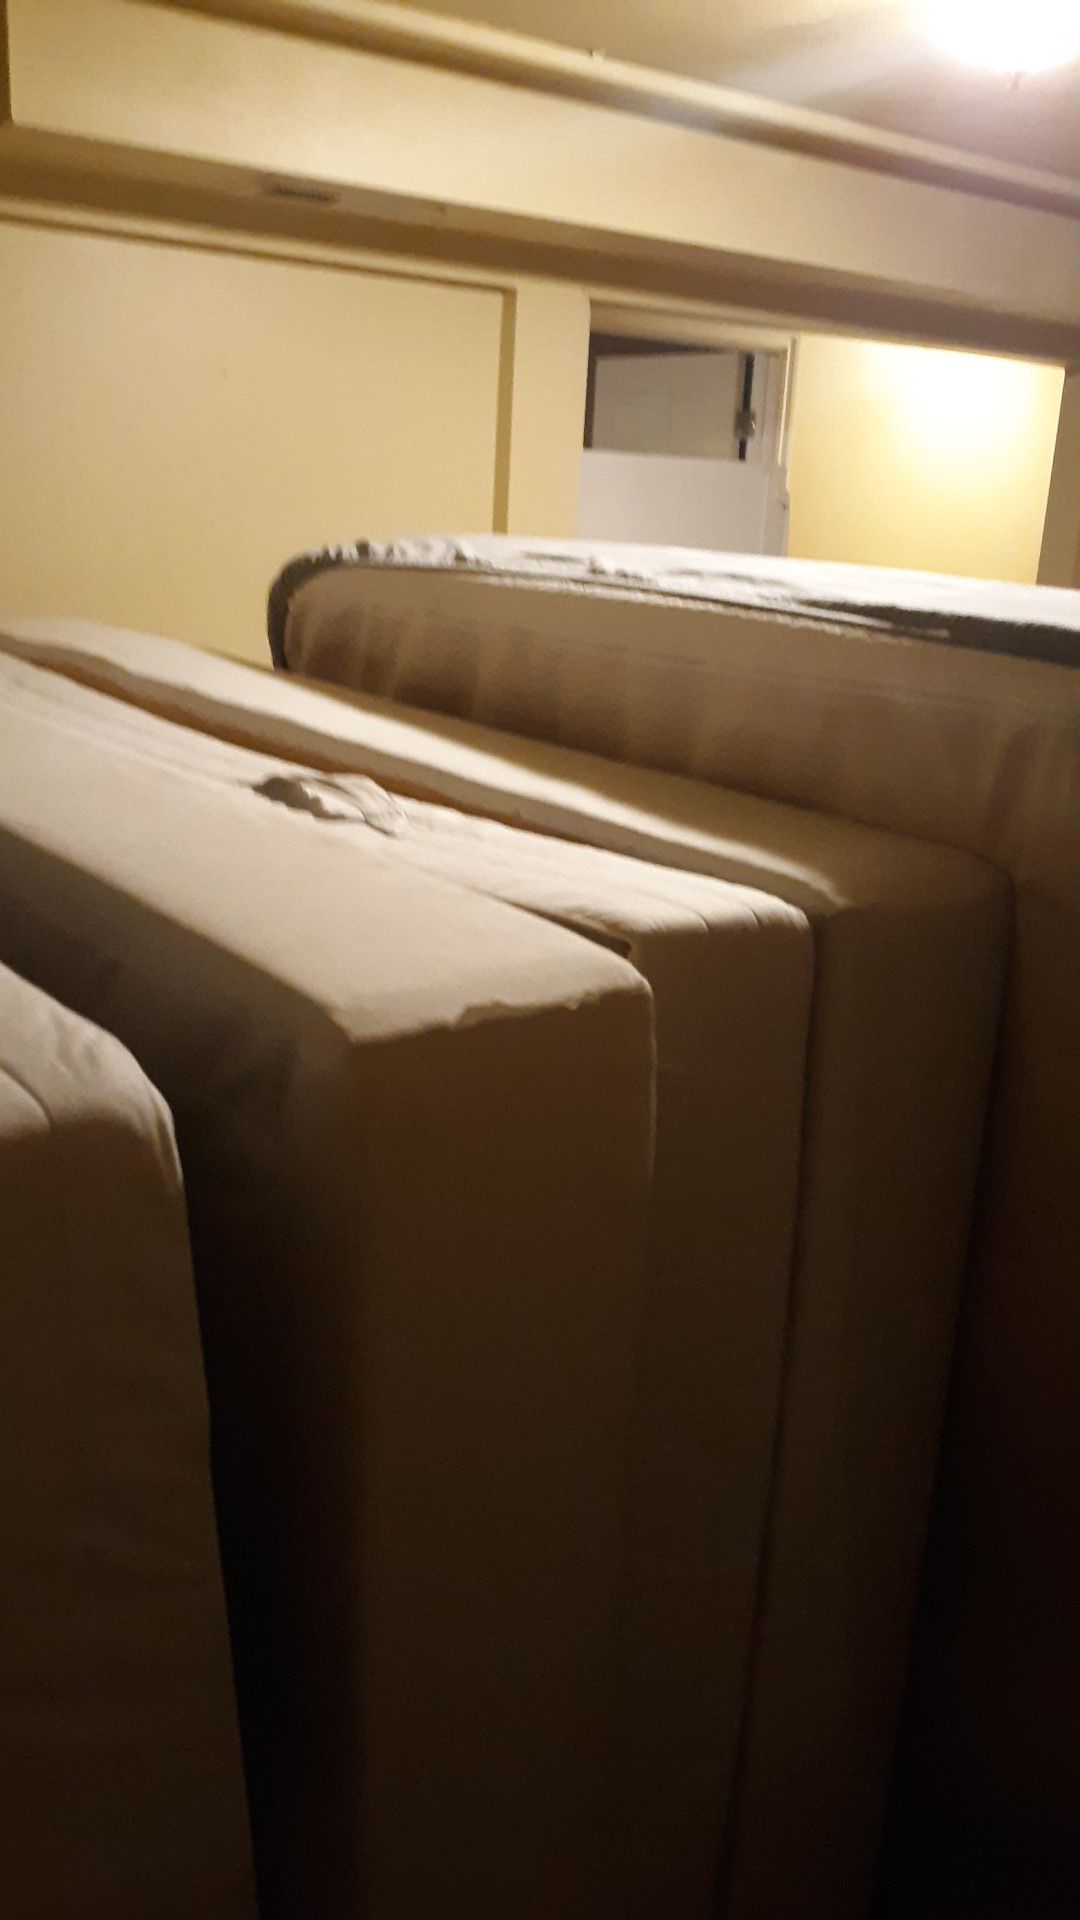 Two full-size beds and one memory foam mattress